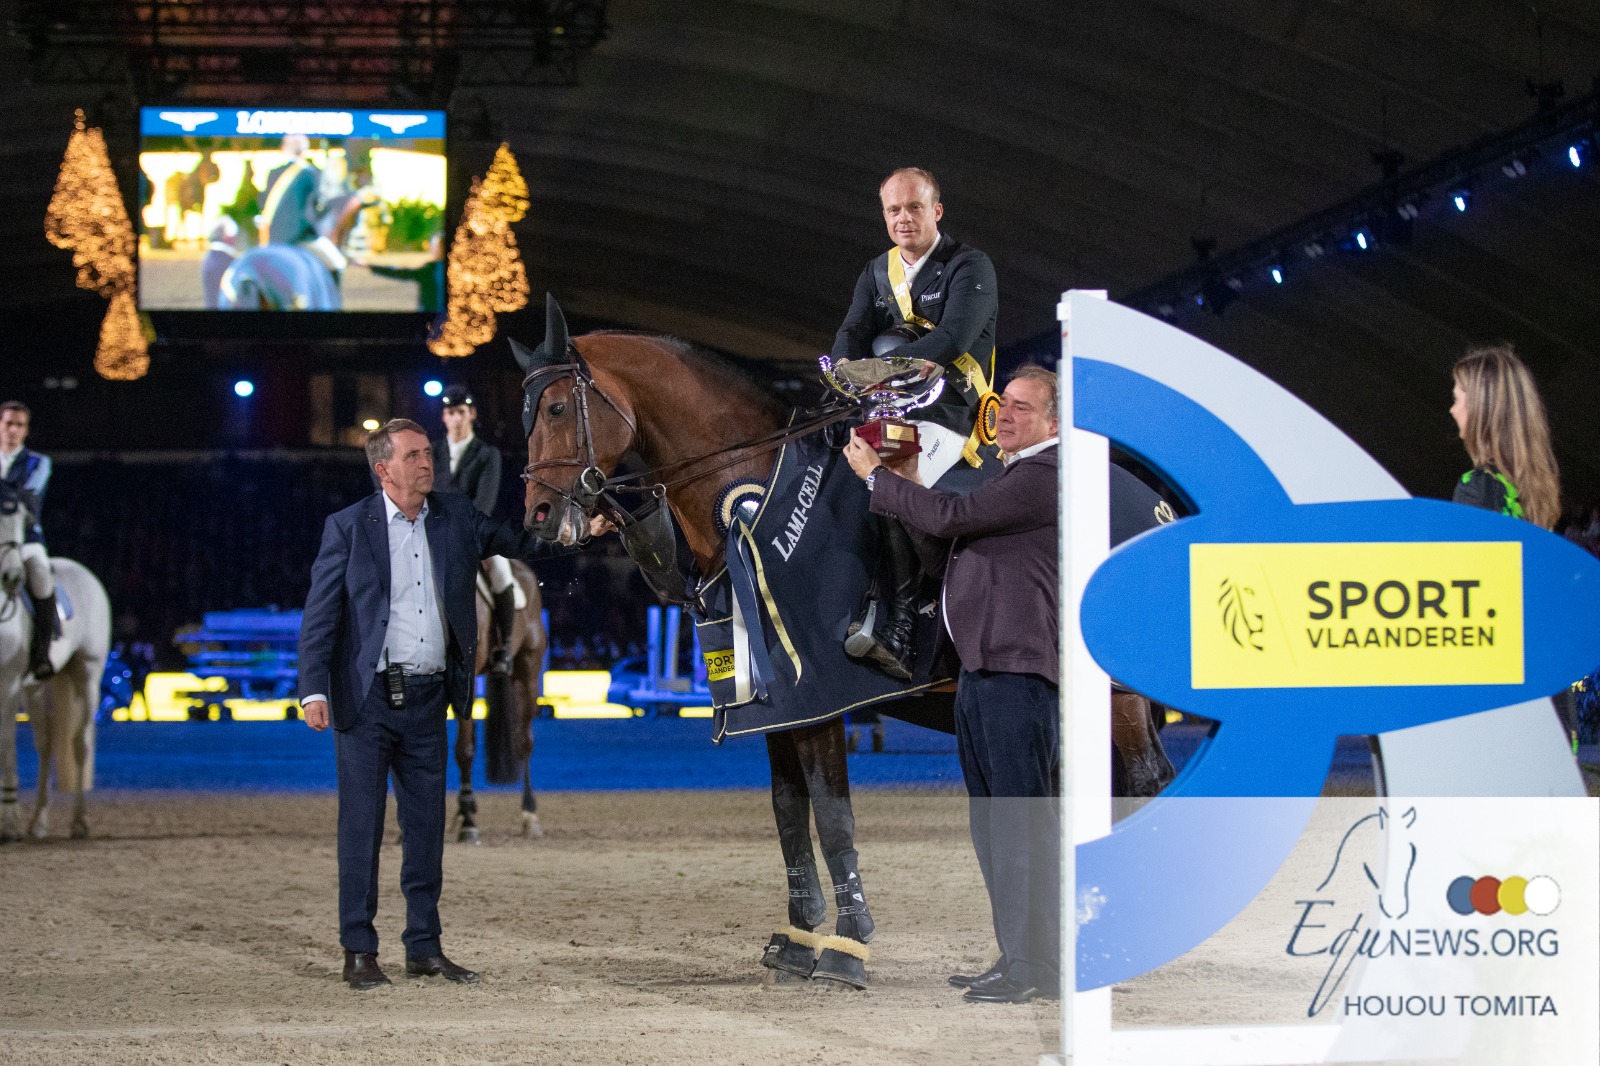 Willem Greve puts the cherry on the cake with CSI5* Grand Prix win in Mechelen